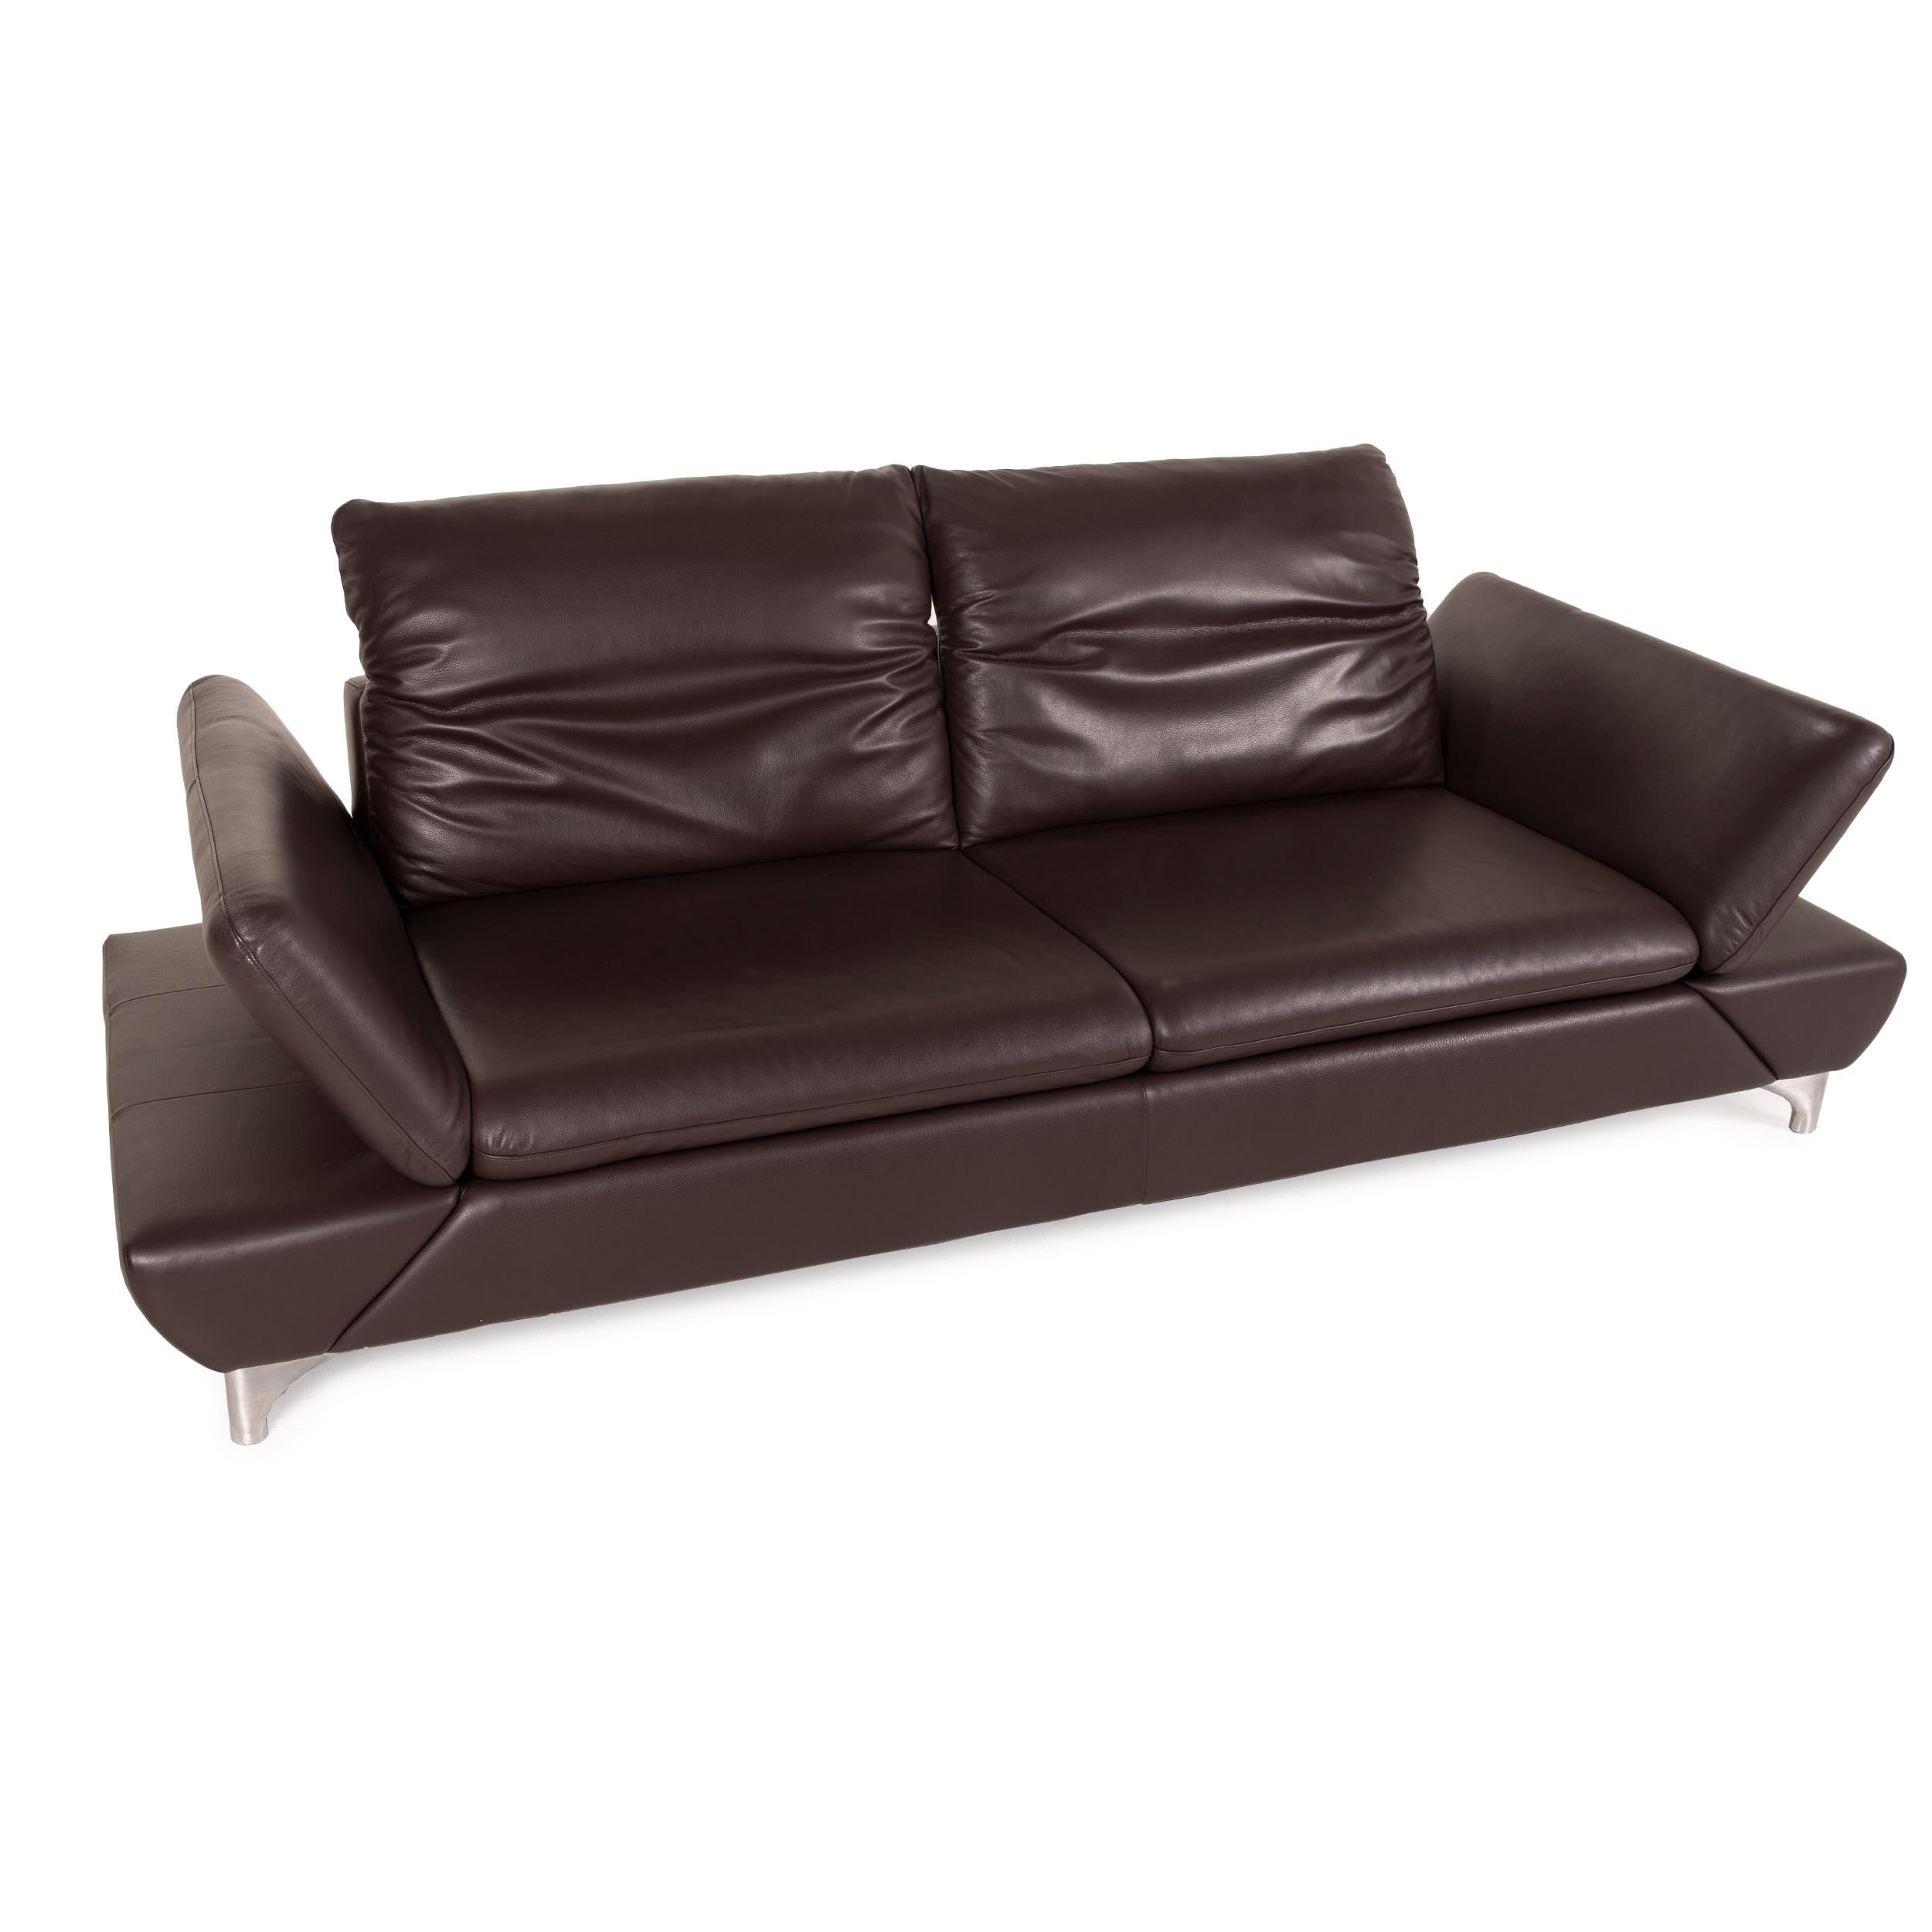 Modern Willi Schillig Taoo Leather Sofa Brown Three-Seater Sofa Function Couch Dark For Sale